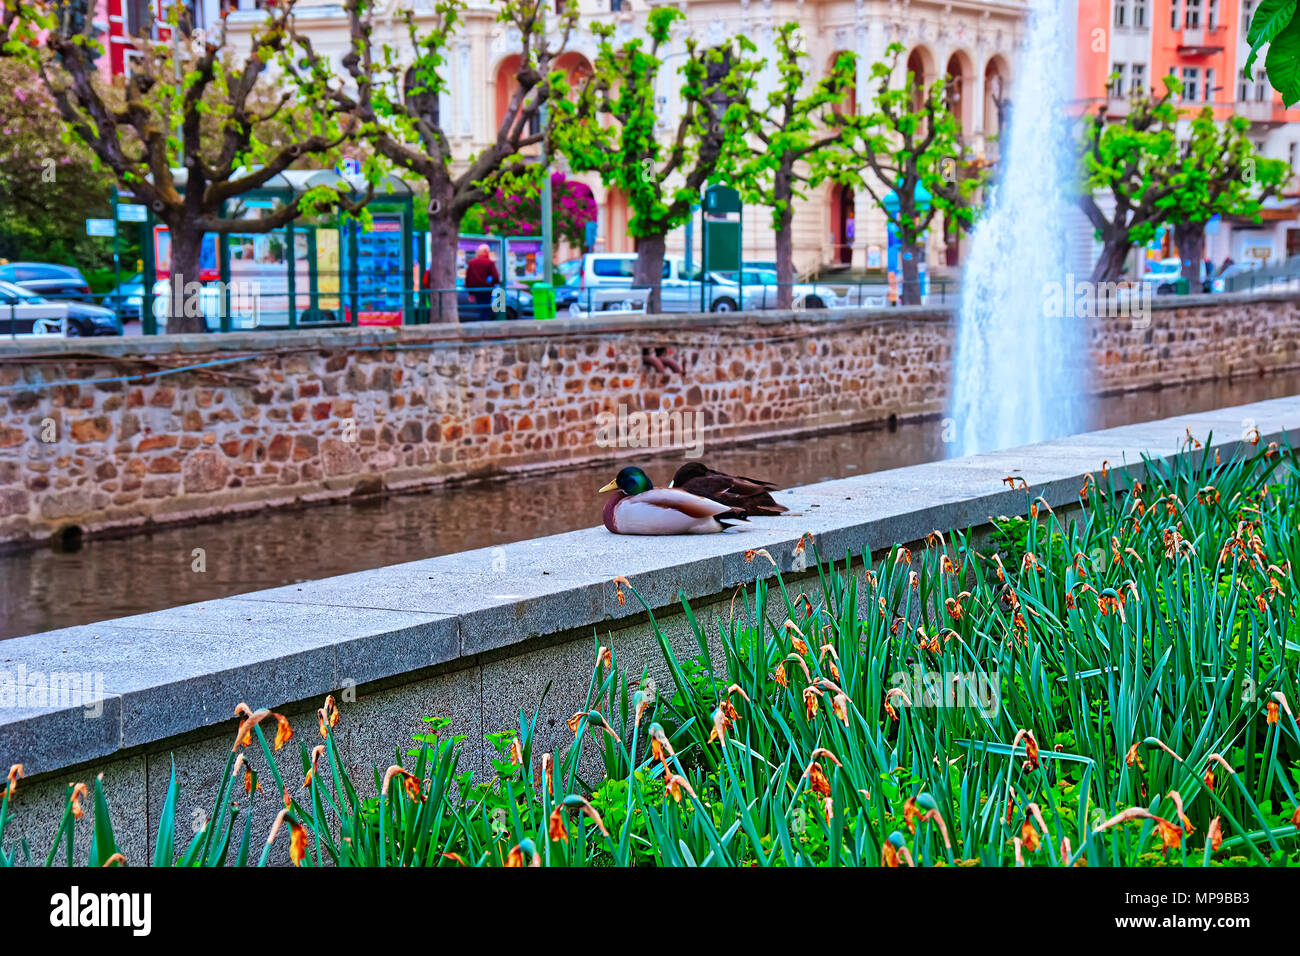 Ducks at the Fountain in Tepla River, Karlovy Vary, Czech republic Stock Photo